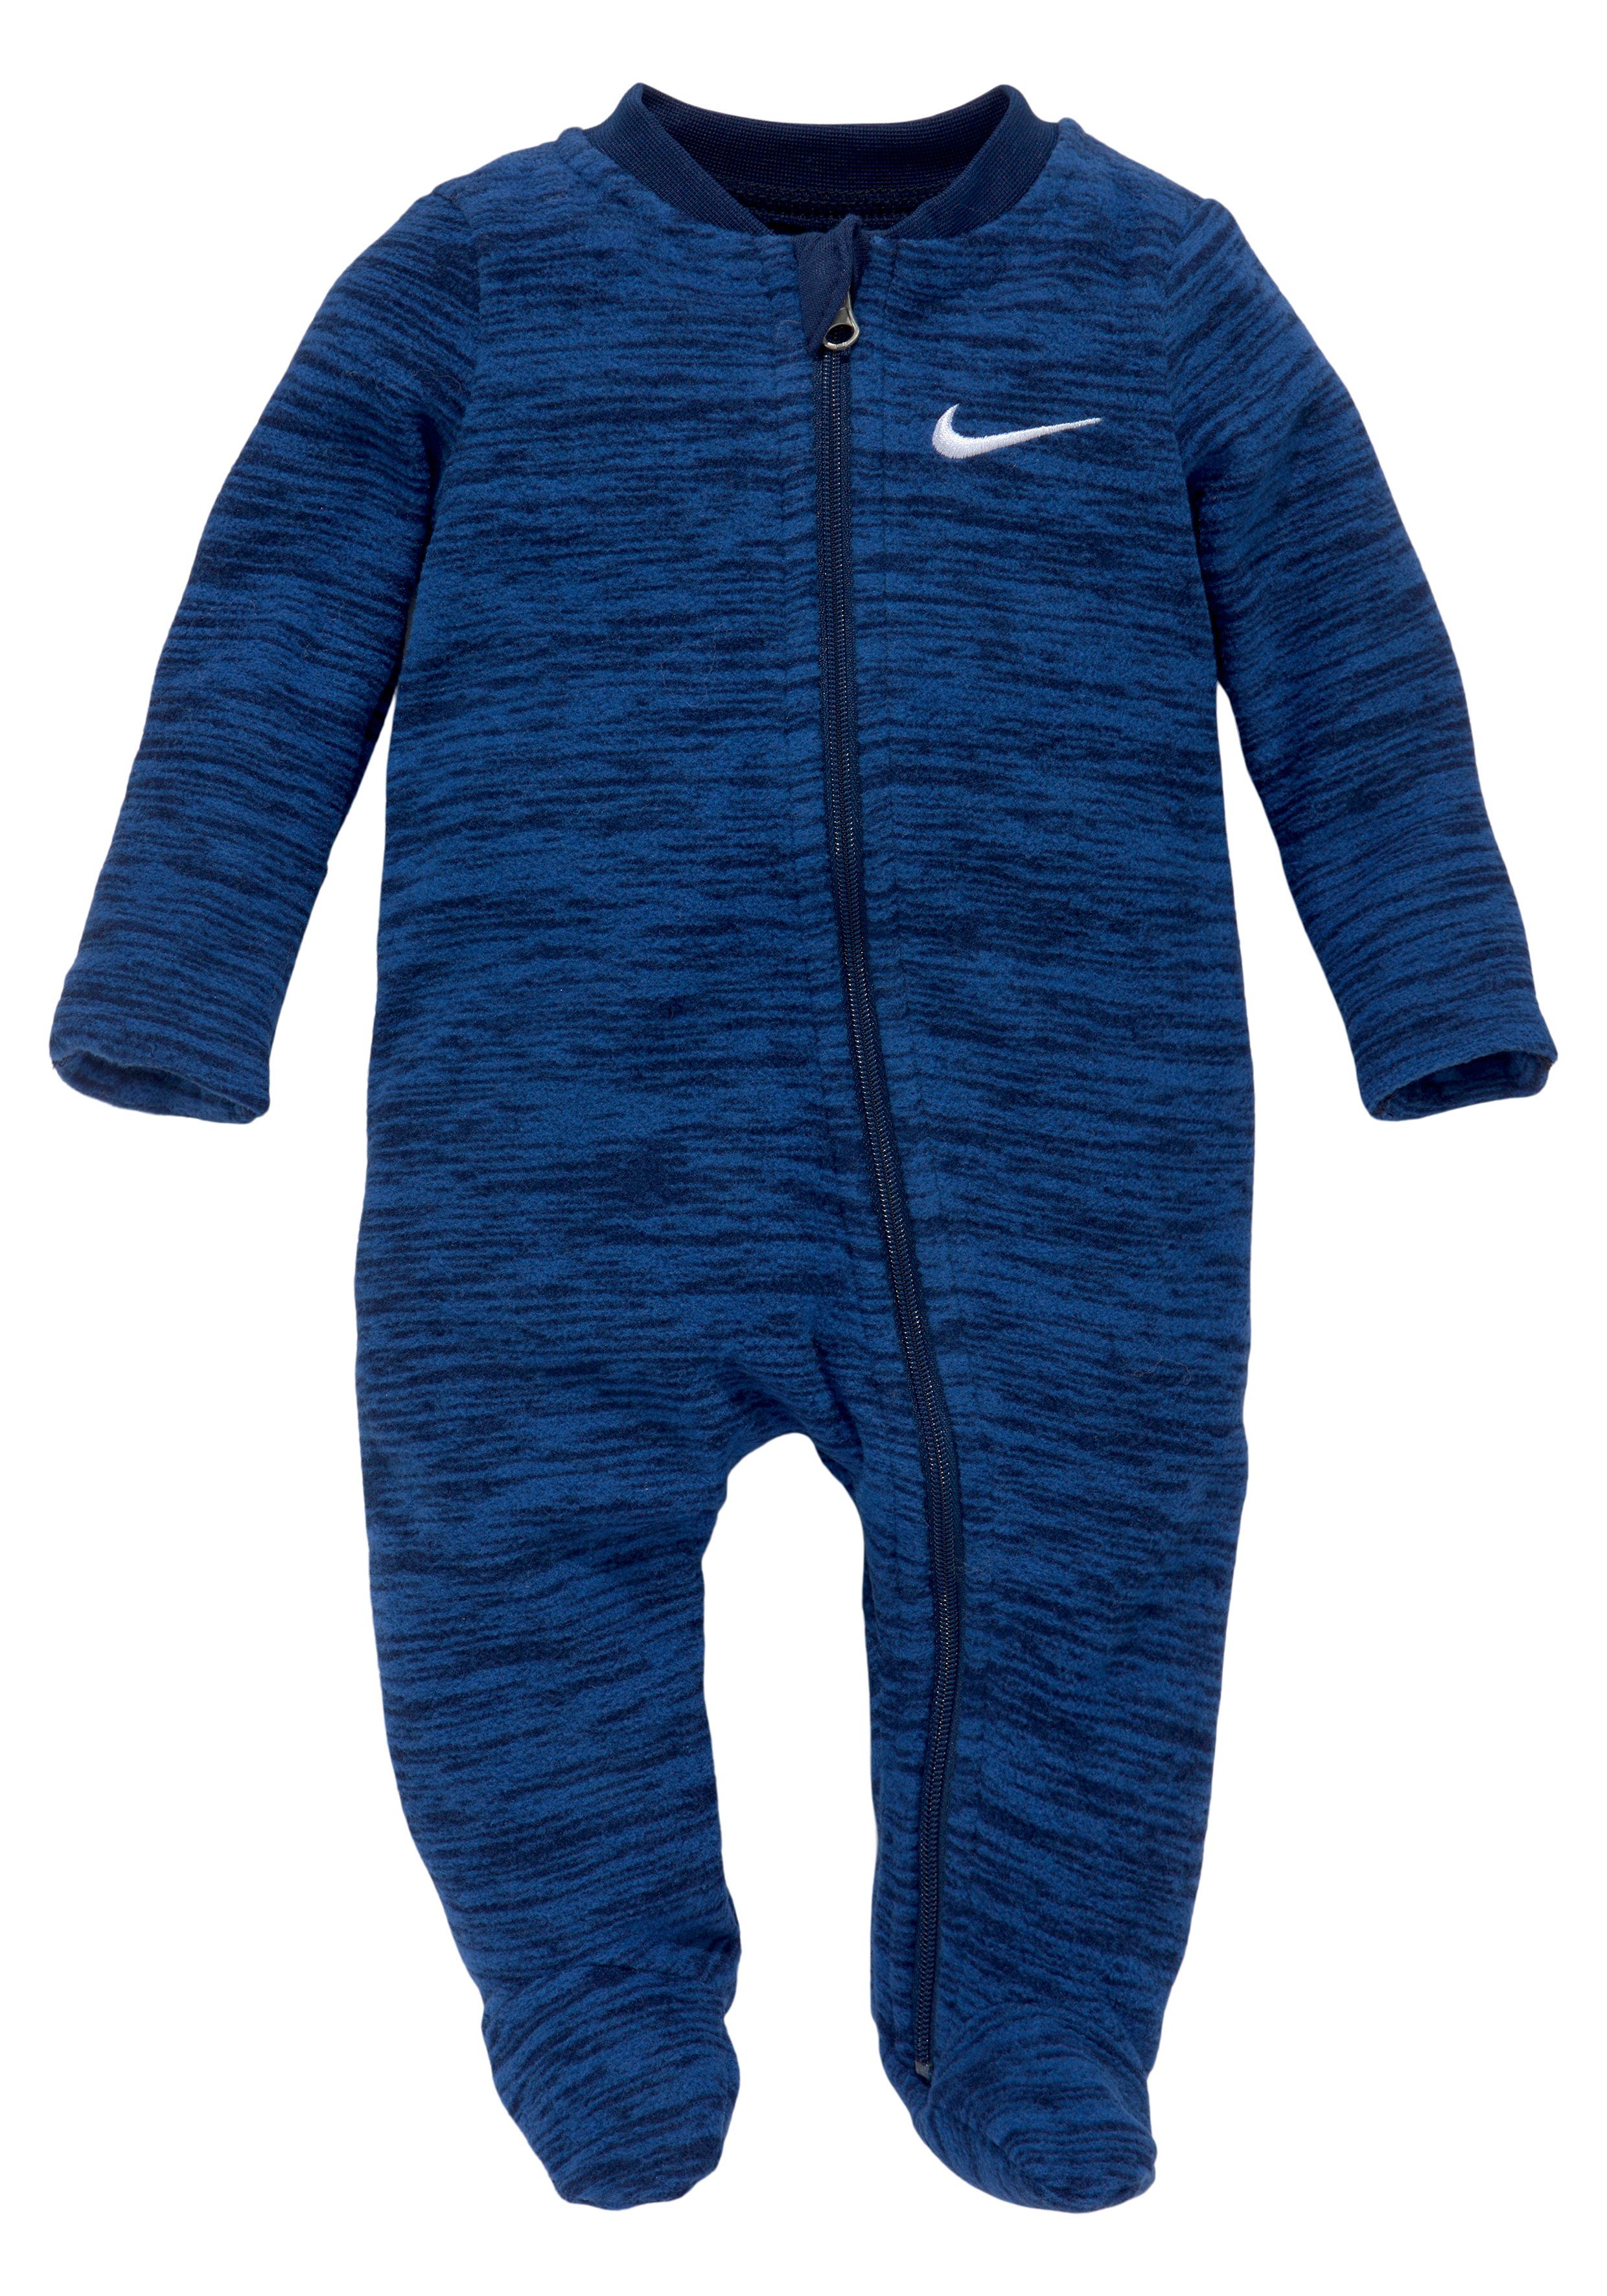 FOOTED SPACE Sportswear Nike DYED Strampler COVERALL